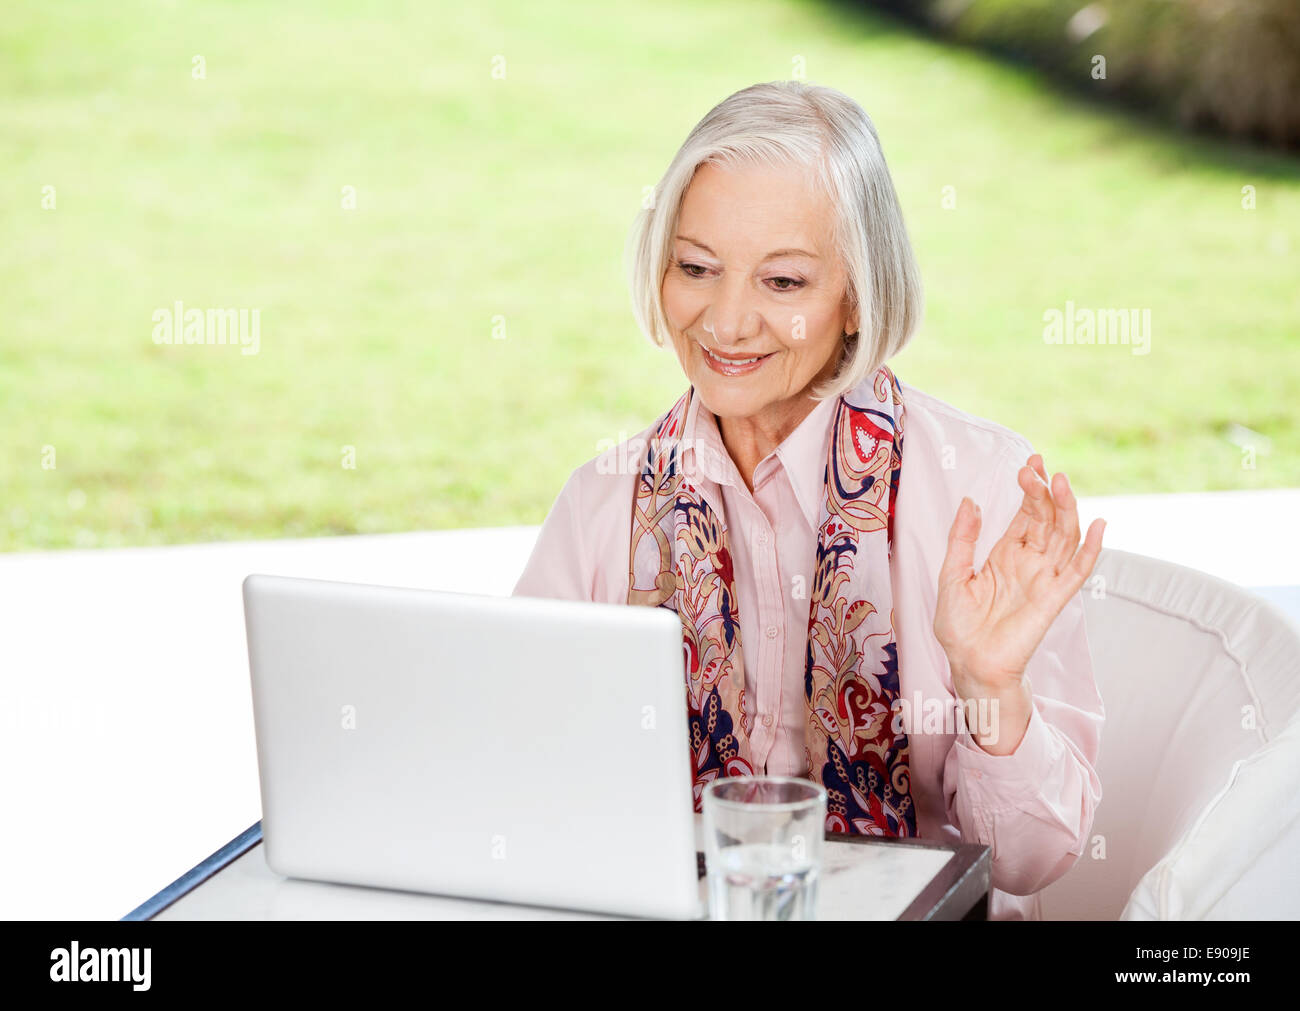 Senior Woman Waving While Video Conferencing On Laptop Stock Photo